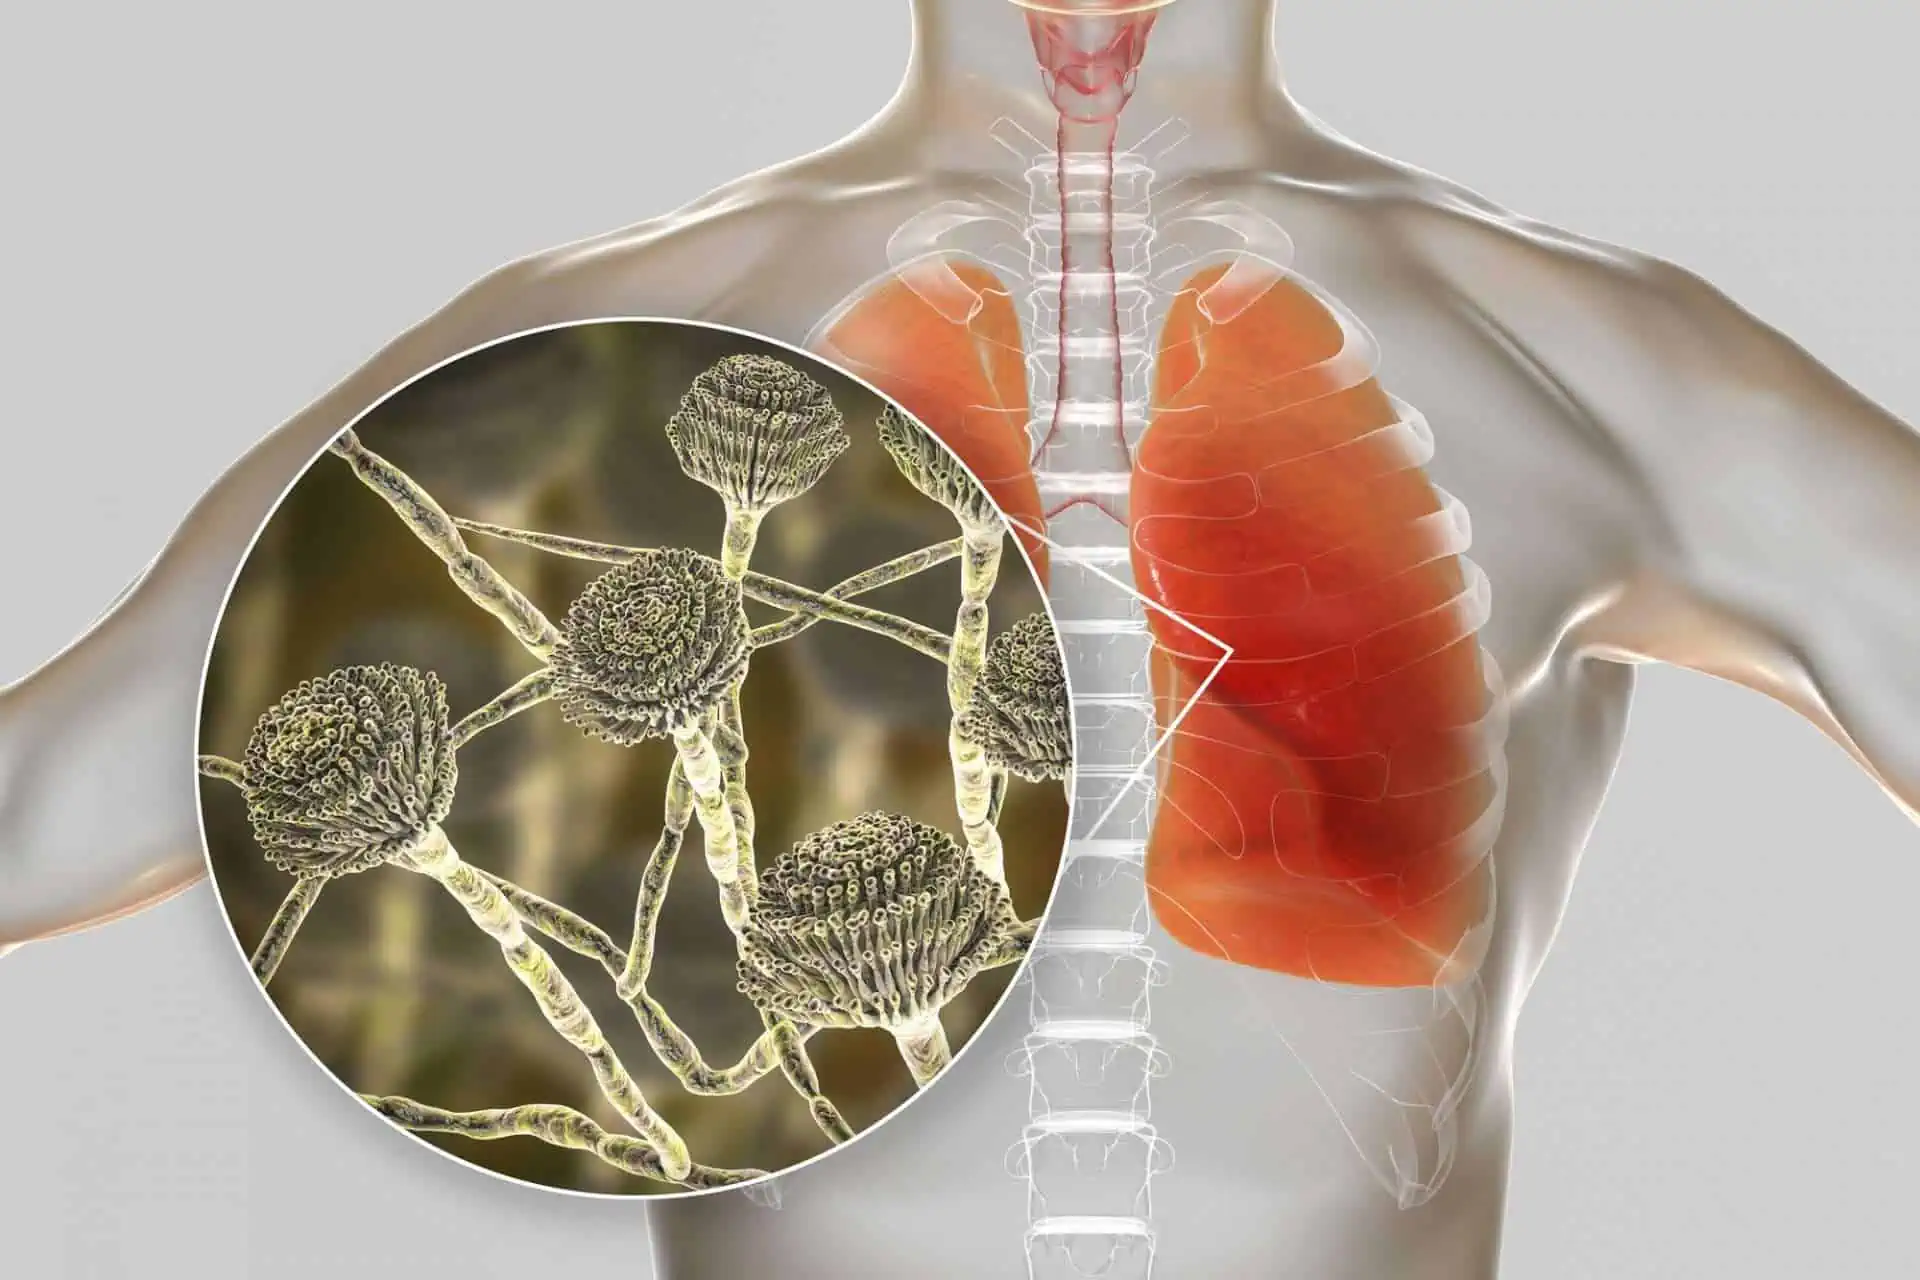 Can mold grow in your lungs?